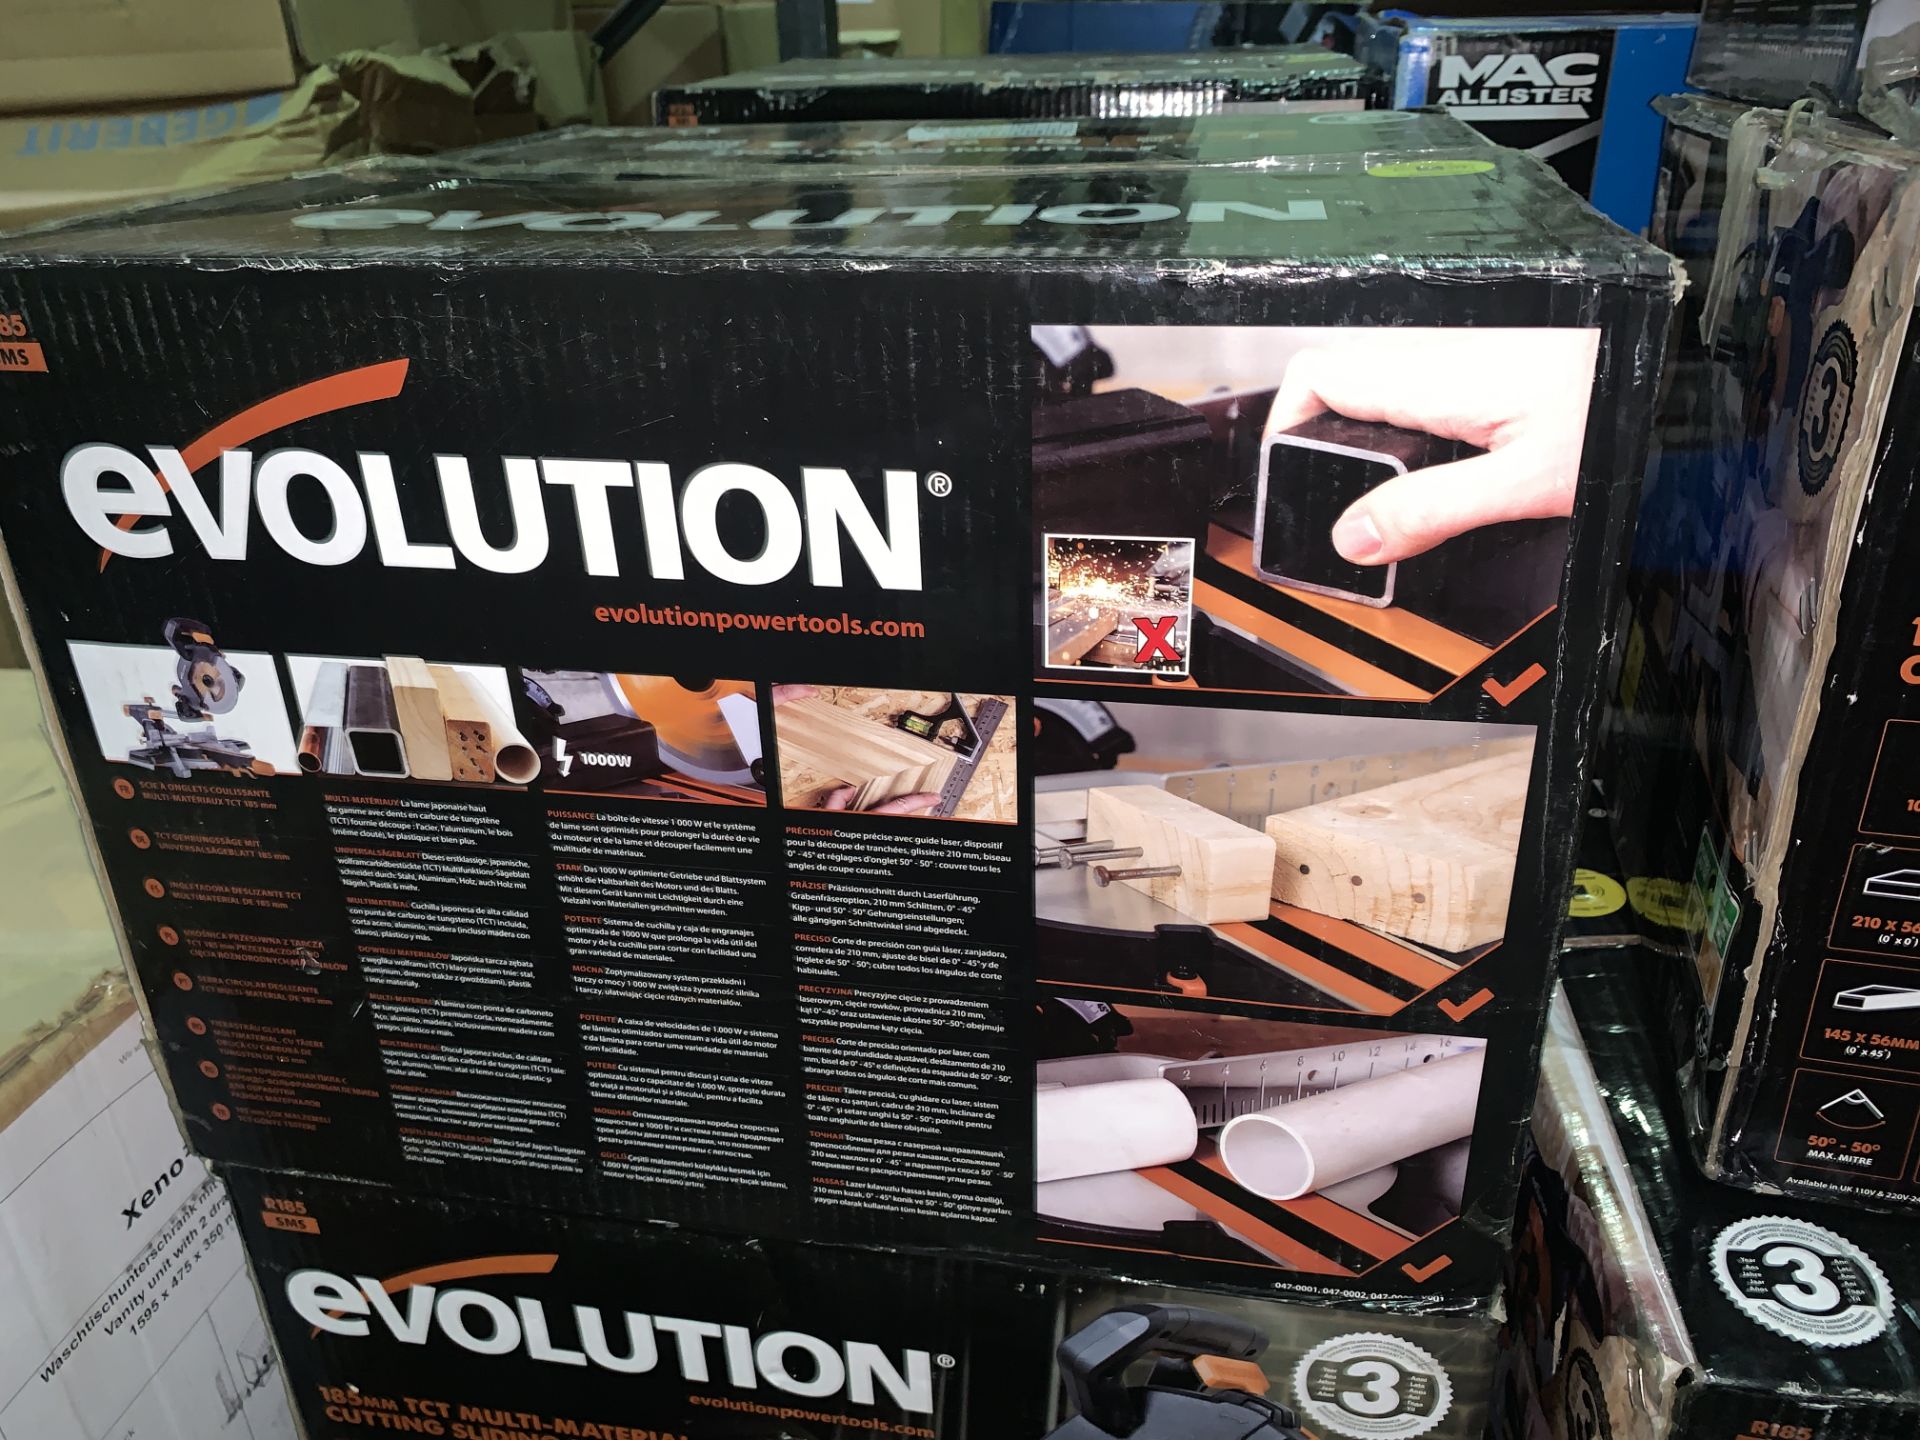 EVOLUTION R185SMS 185MM SLIDING MITRE SAW 110V COMES WITH BOX (UNCHECKED, UNTESTED)